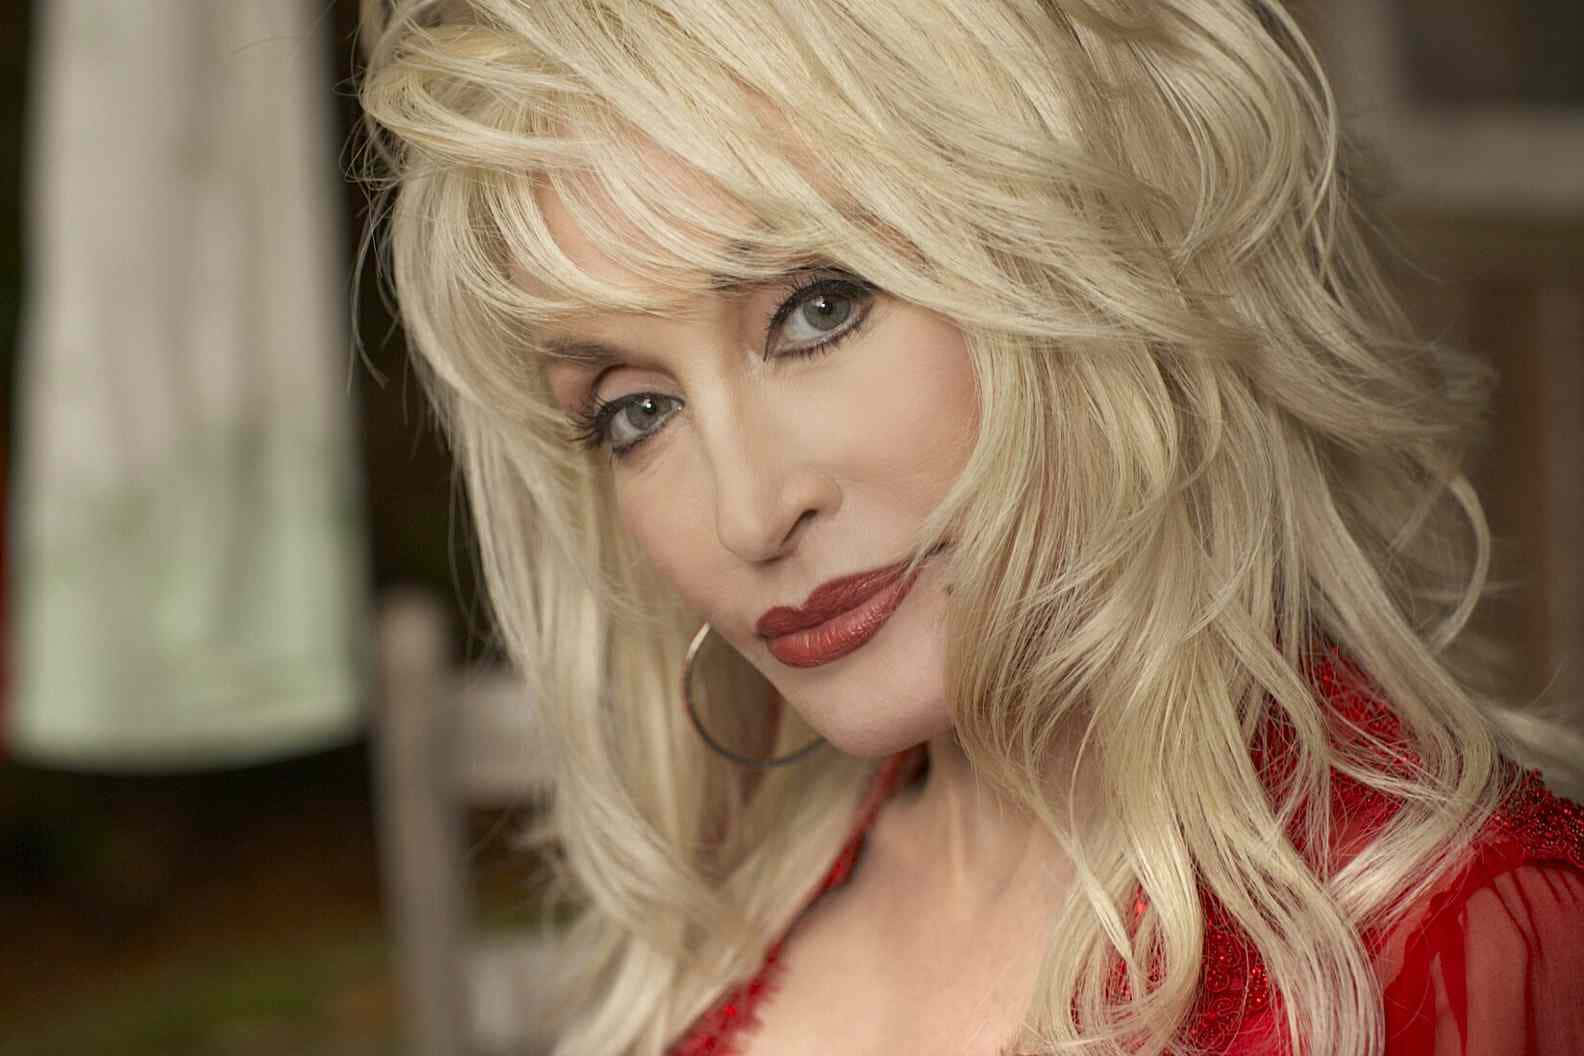 Dolly Parton Iconic Look Wallpaper